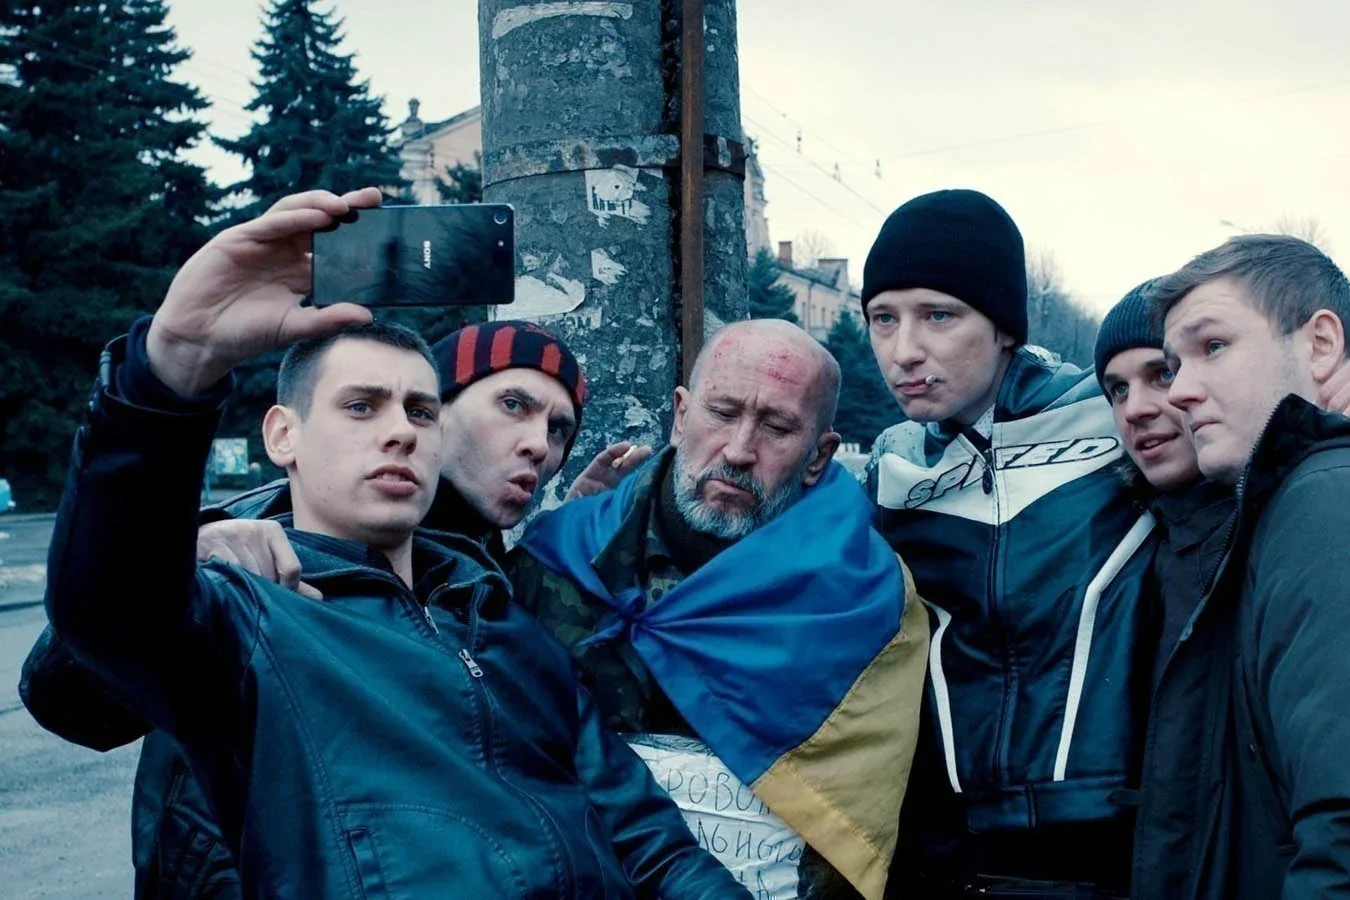 Five relatively young men pose with an older man draped in a Ukrainian flag for a selfie. The man in the Ukrainian flag looks beaten down, as if he's been forced into this.